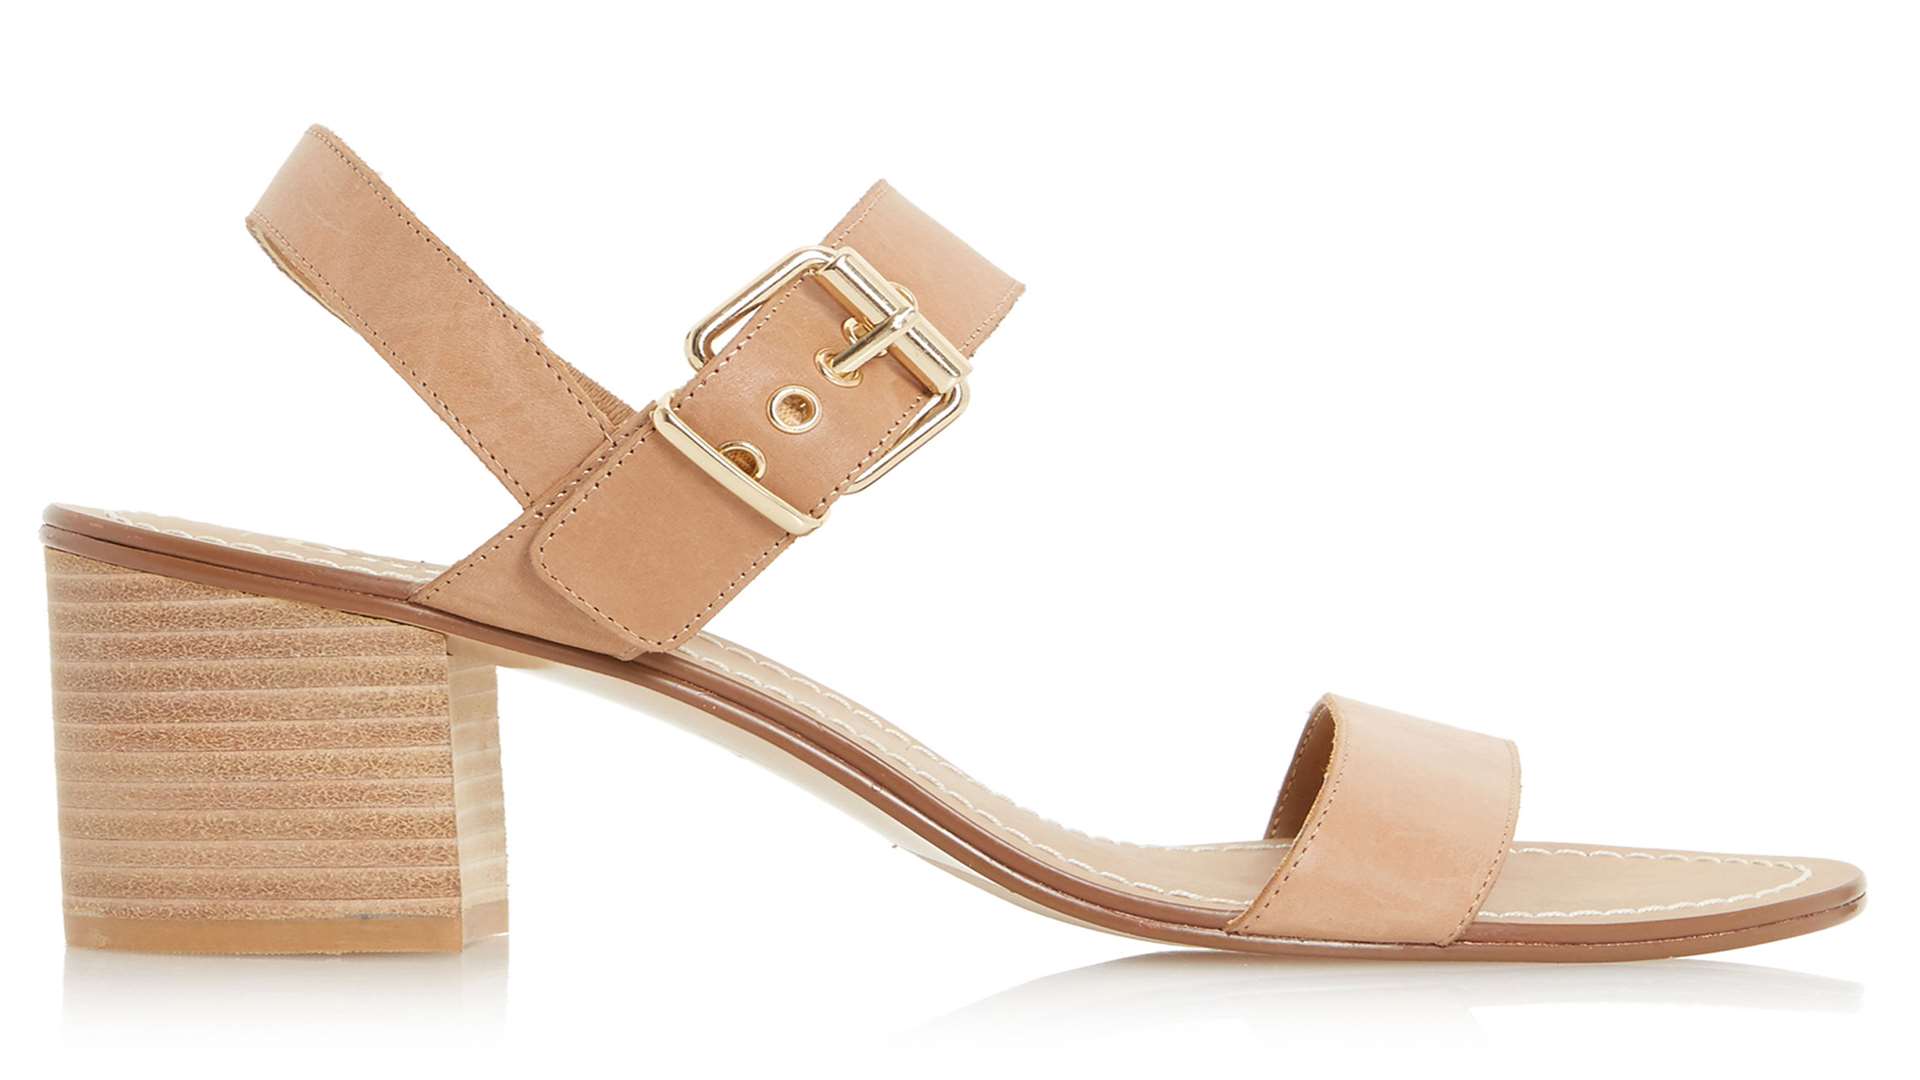 Dune Jany Tan Sandals, £55 (reduced from £70)